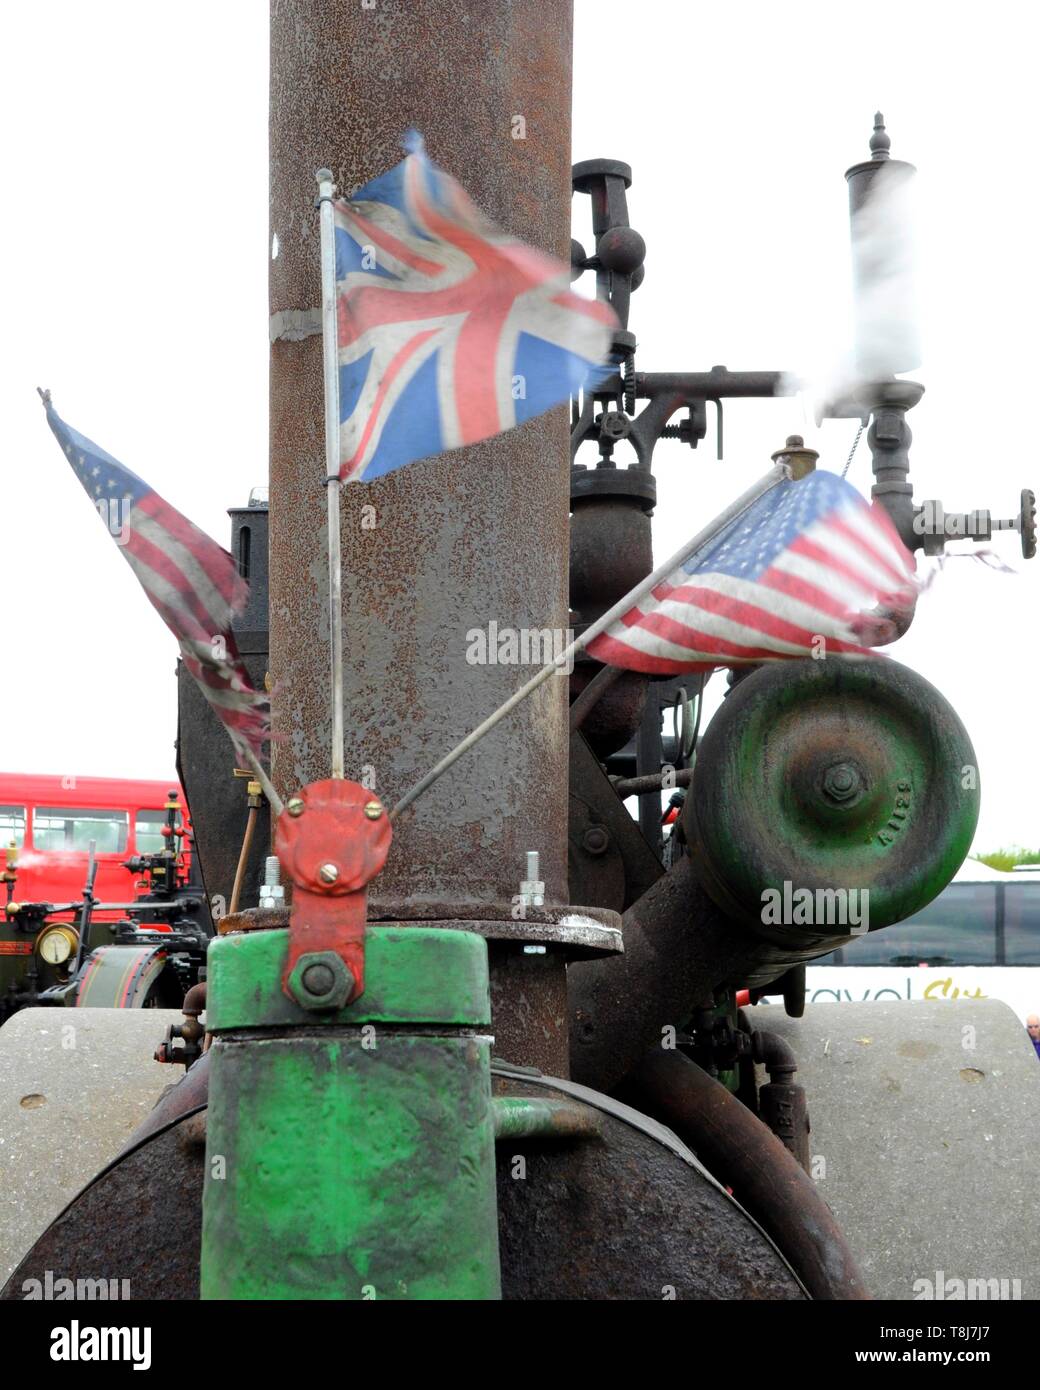 British and American flags on front of 1910 Springfield steamroller at the 2019 Merton Vintage Show near Faversham, Kent, UK. Stock Photo